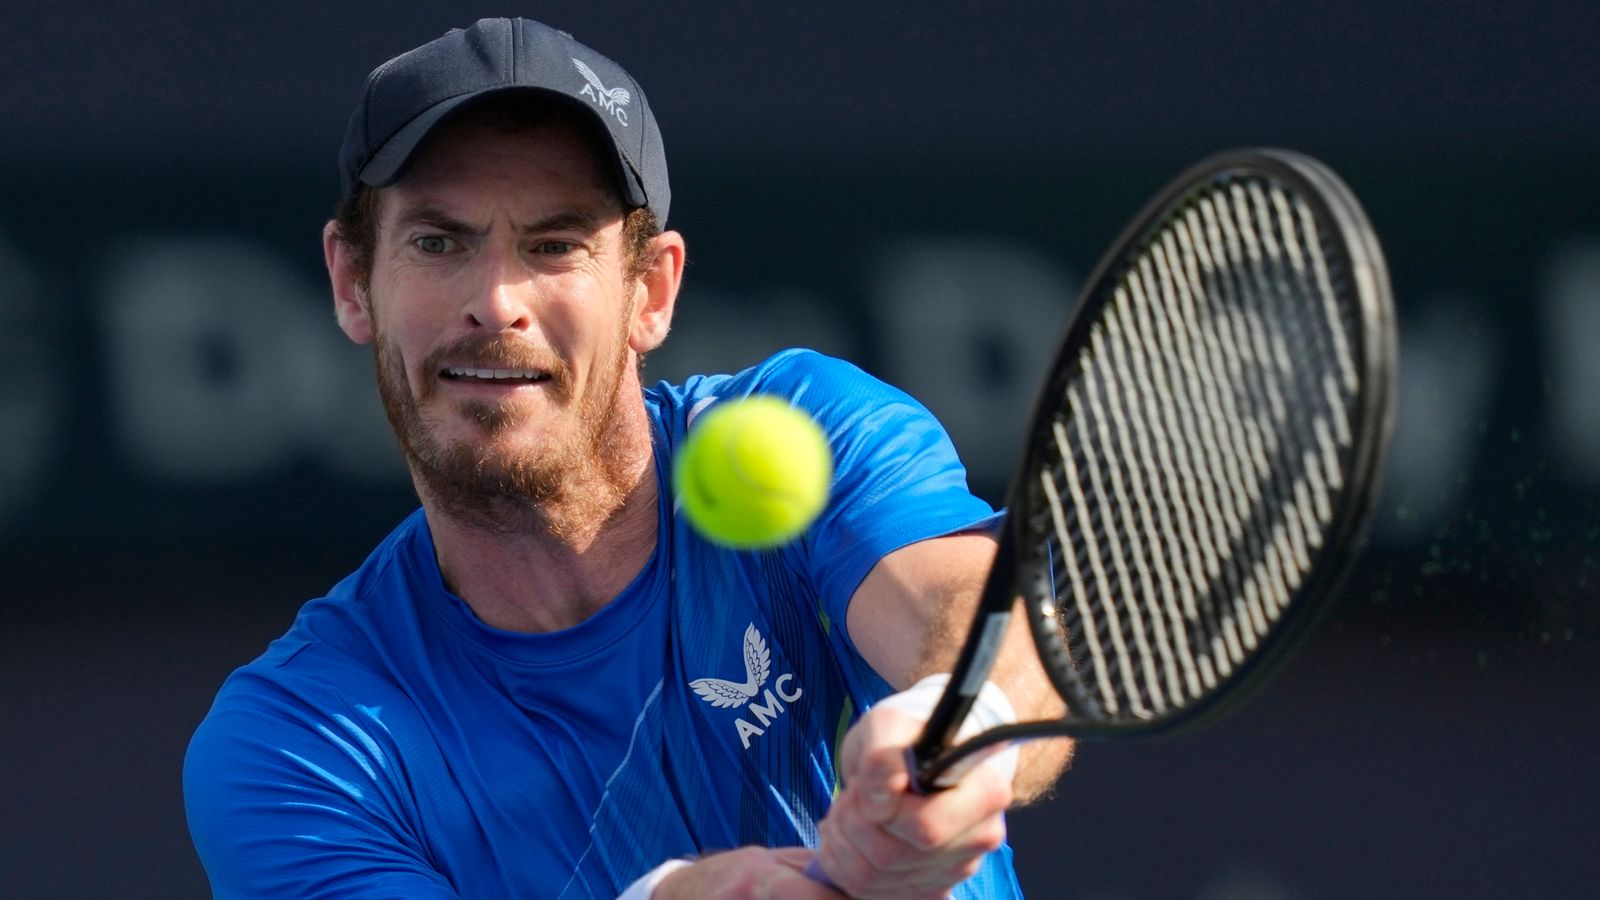 Andy Murray to compete at Queen's Club and Surbiton events alongside fellow Brits